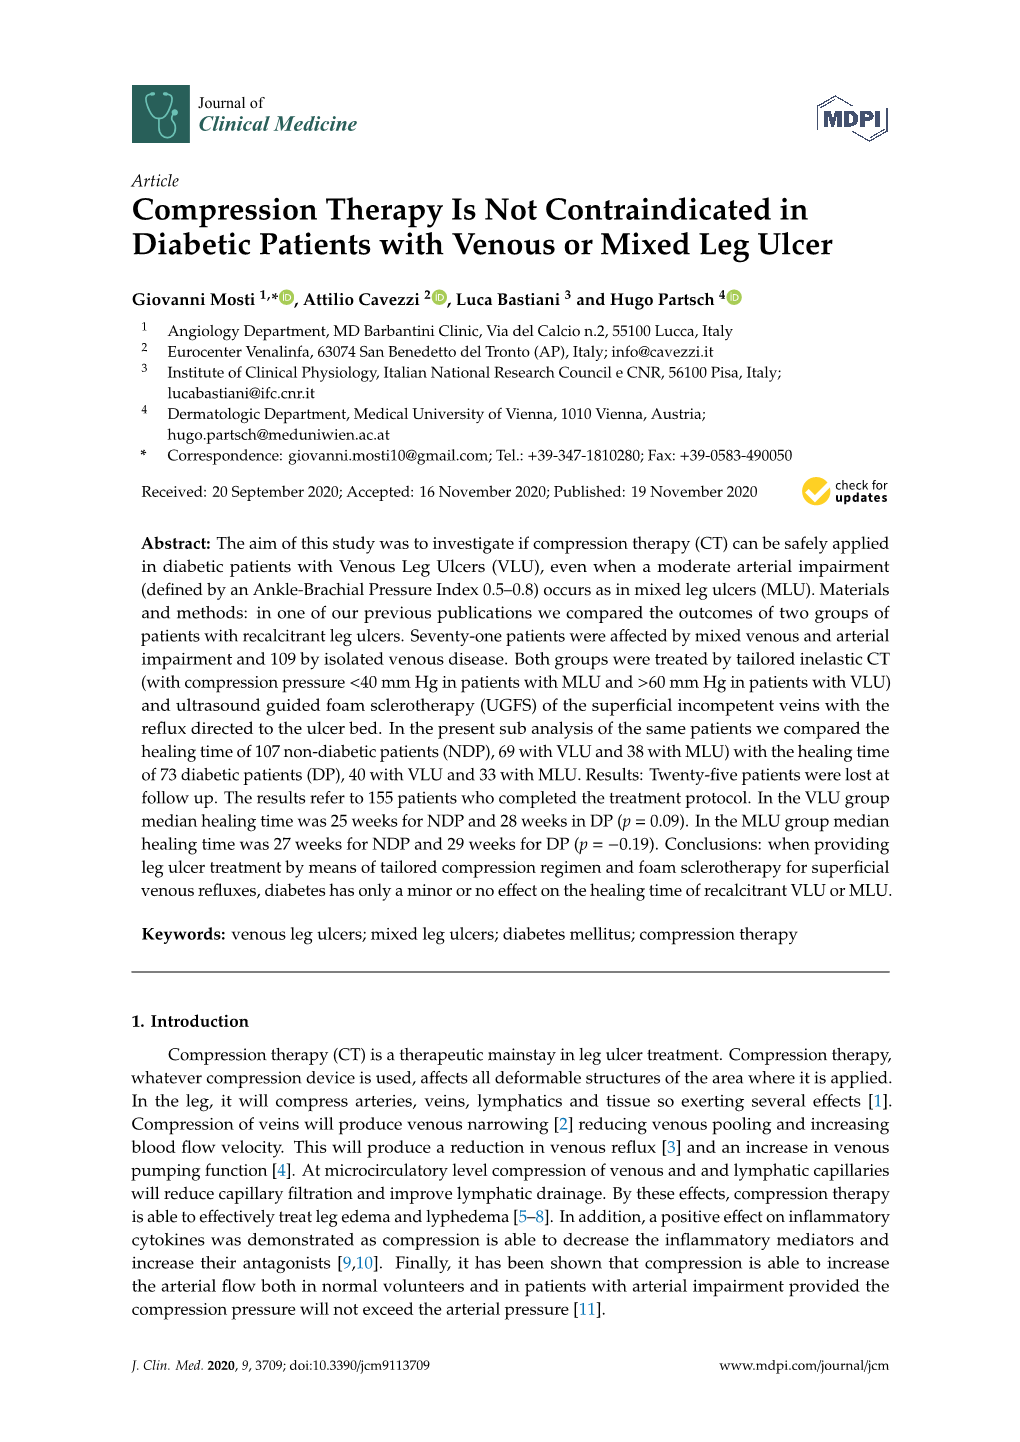 Compression Therapy Is Not Contraindicated in Diabetic Patients with Venous Or Mixed Leg Ulcer